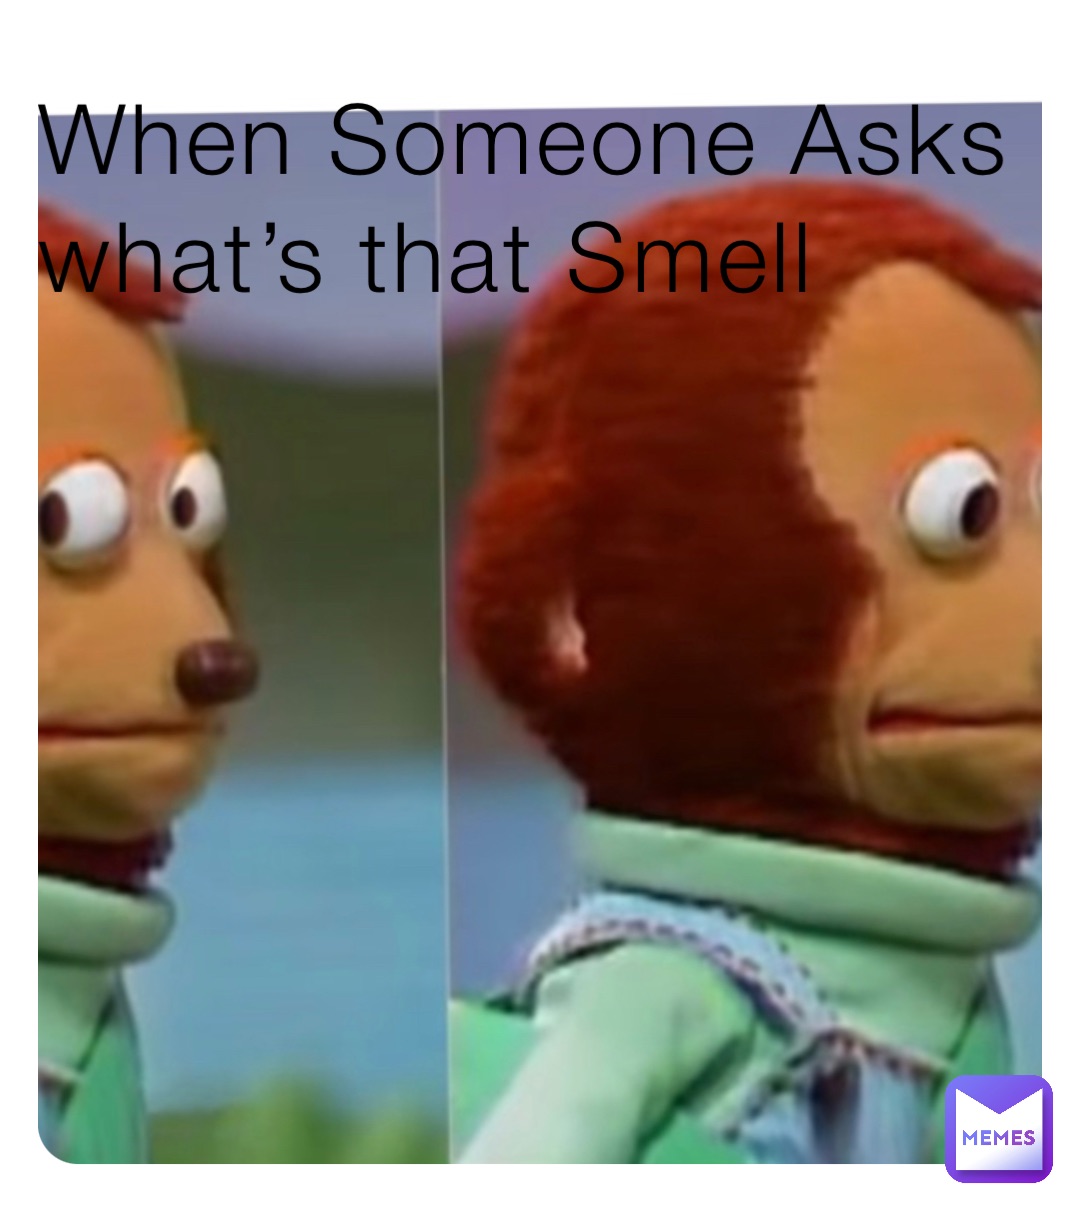 When Someone Asks what’s that Smell